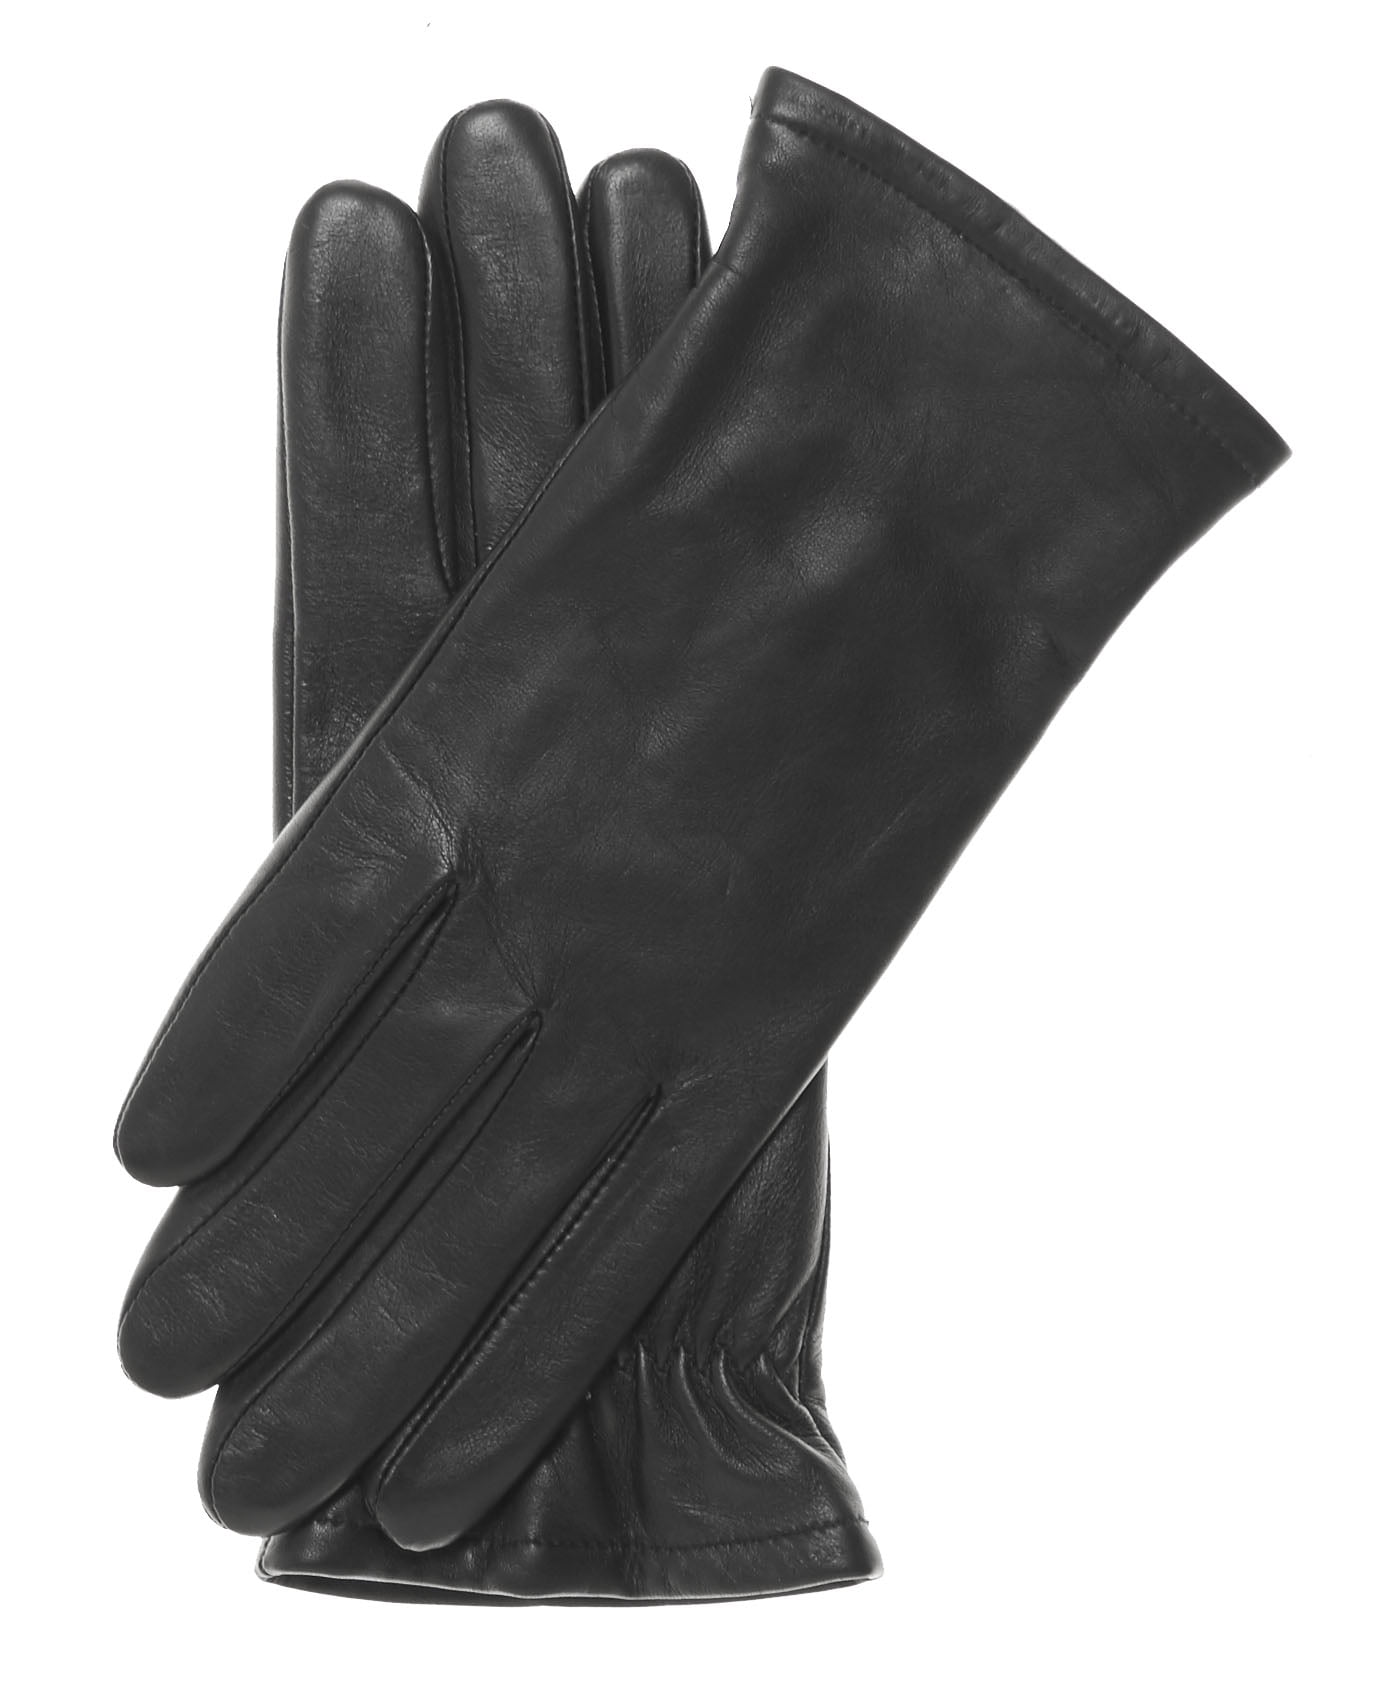 Ladies Womens Premium Super Soft Real Leather Gloves Winter Warm Driving Lined